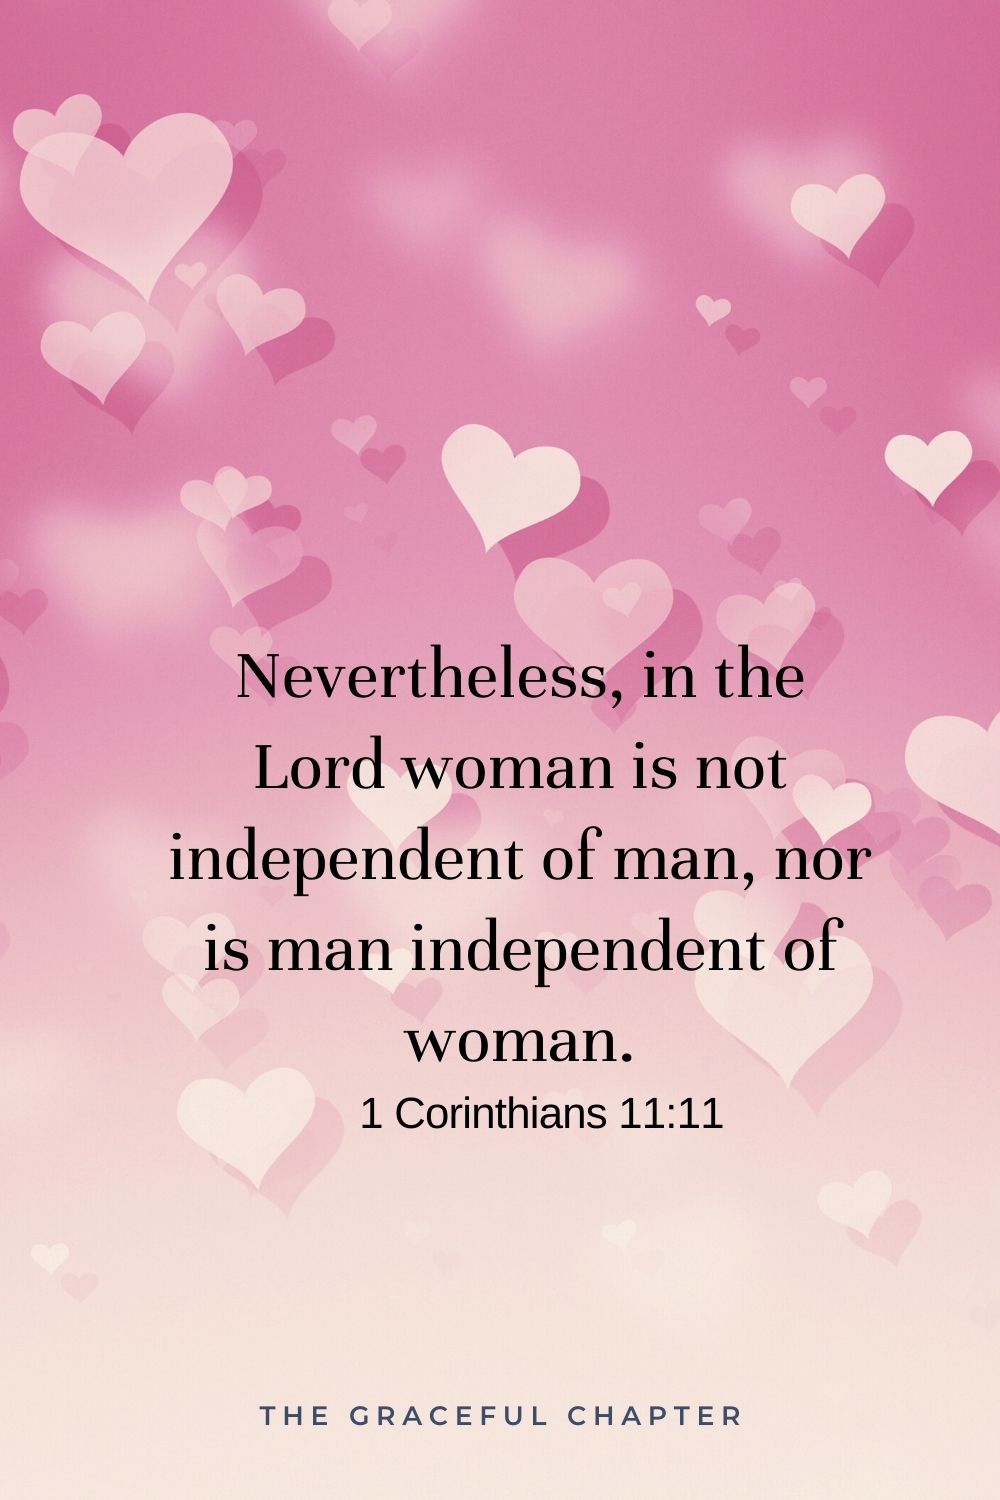 Nevertheless, in the Lord woman is not independent of man, nor is man independent of woman. 1 Corinthians 11:11